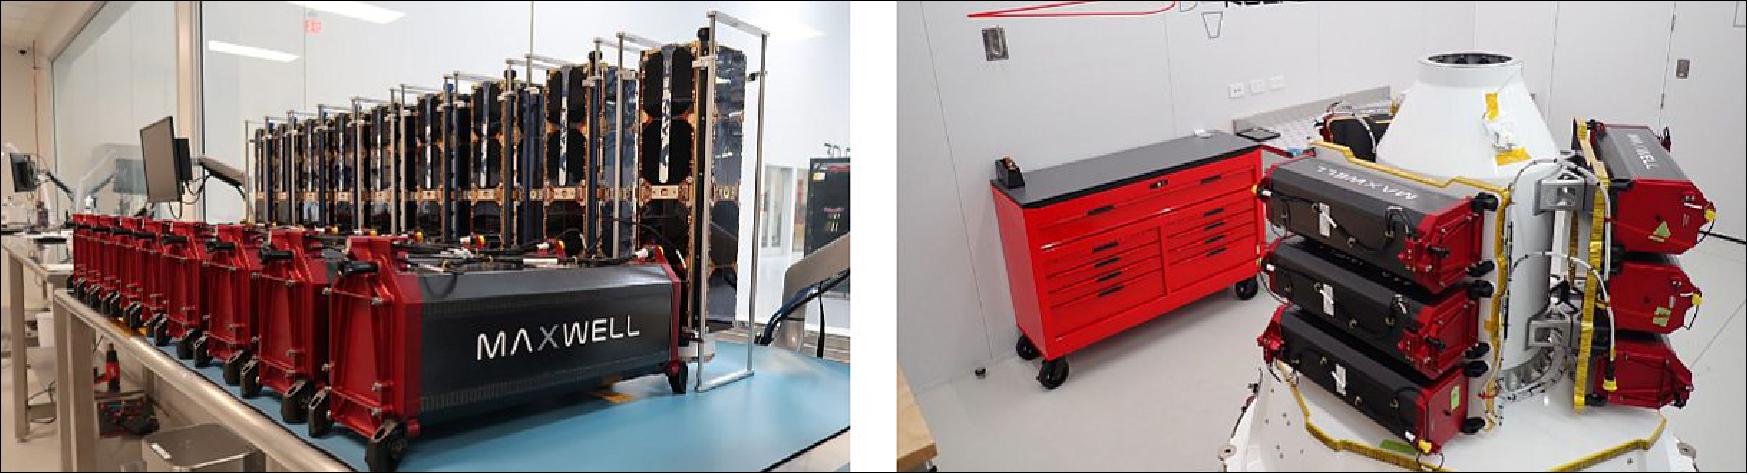 Figure 42: Left: Planet's SuperDoves ready for integration with the Rocket Lab Maxwell dispensers. Right: Planet's SuperDoves integrated with Rocket Lab's kickstage (image credit: Rocket Lab) 66)